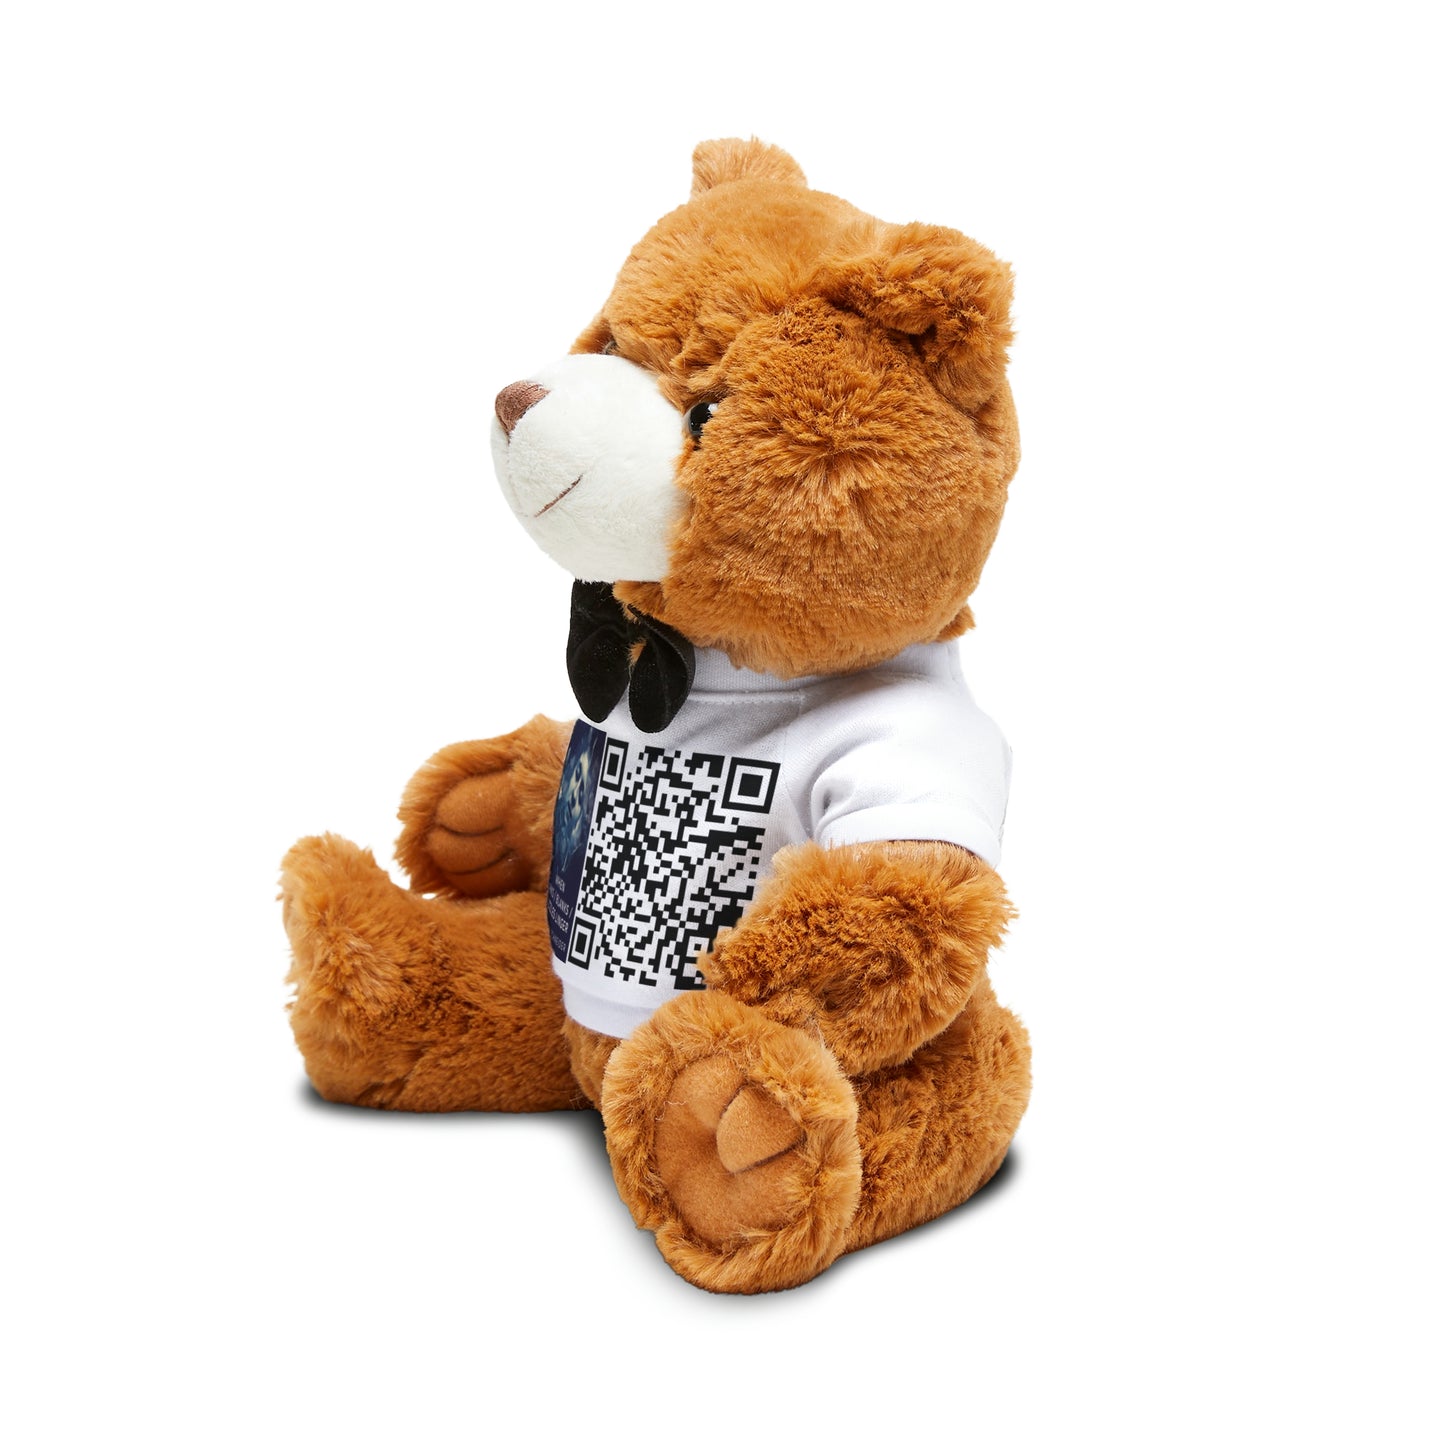 When Links / Blanks / Puzzles Linger - Teddy Bear